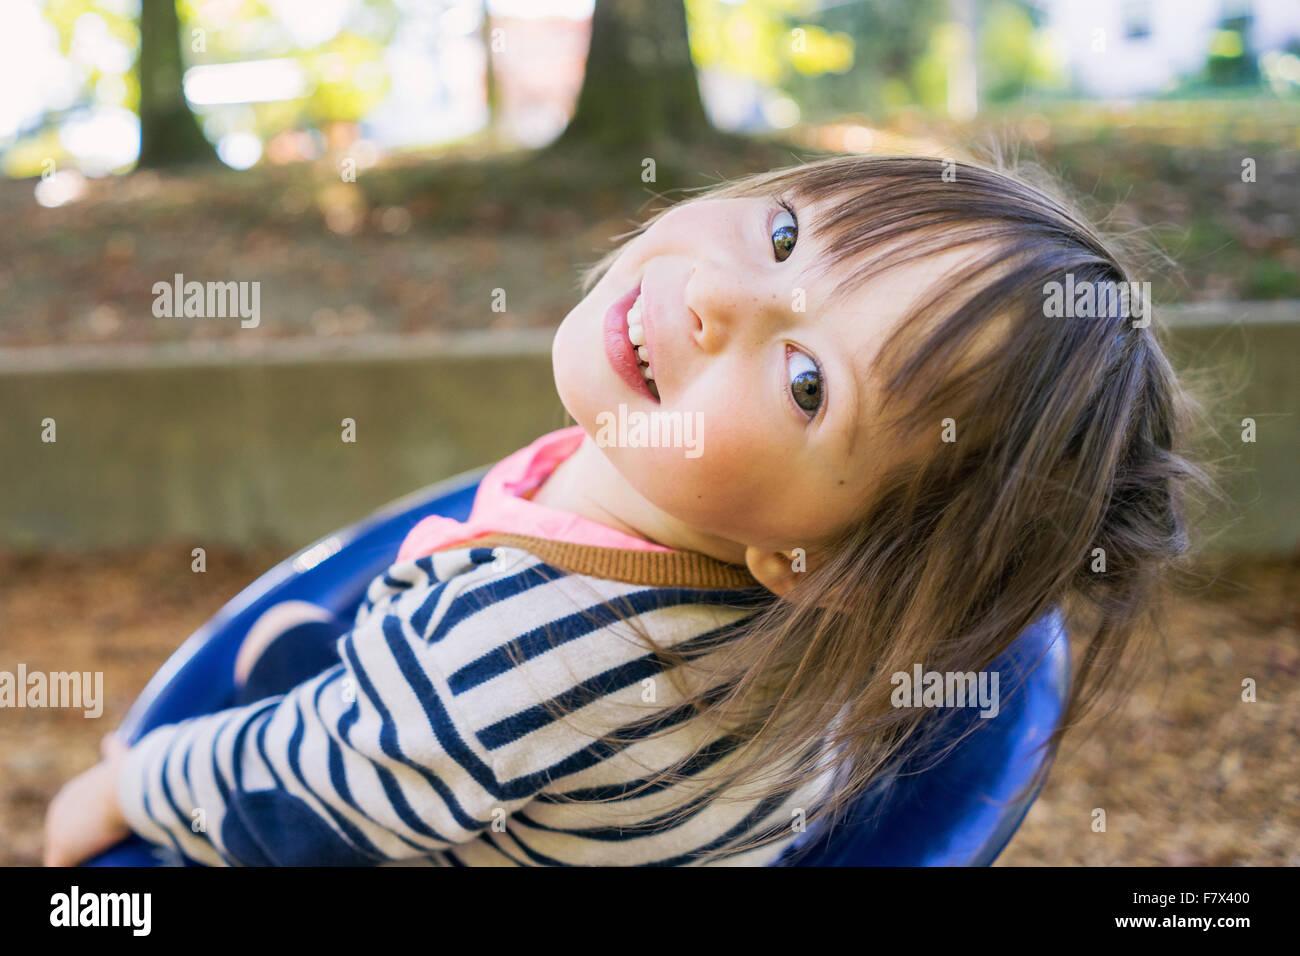 Smiling girl in playground looking over her shoulder Stock Photo